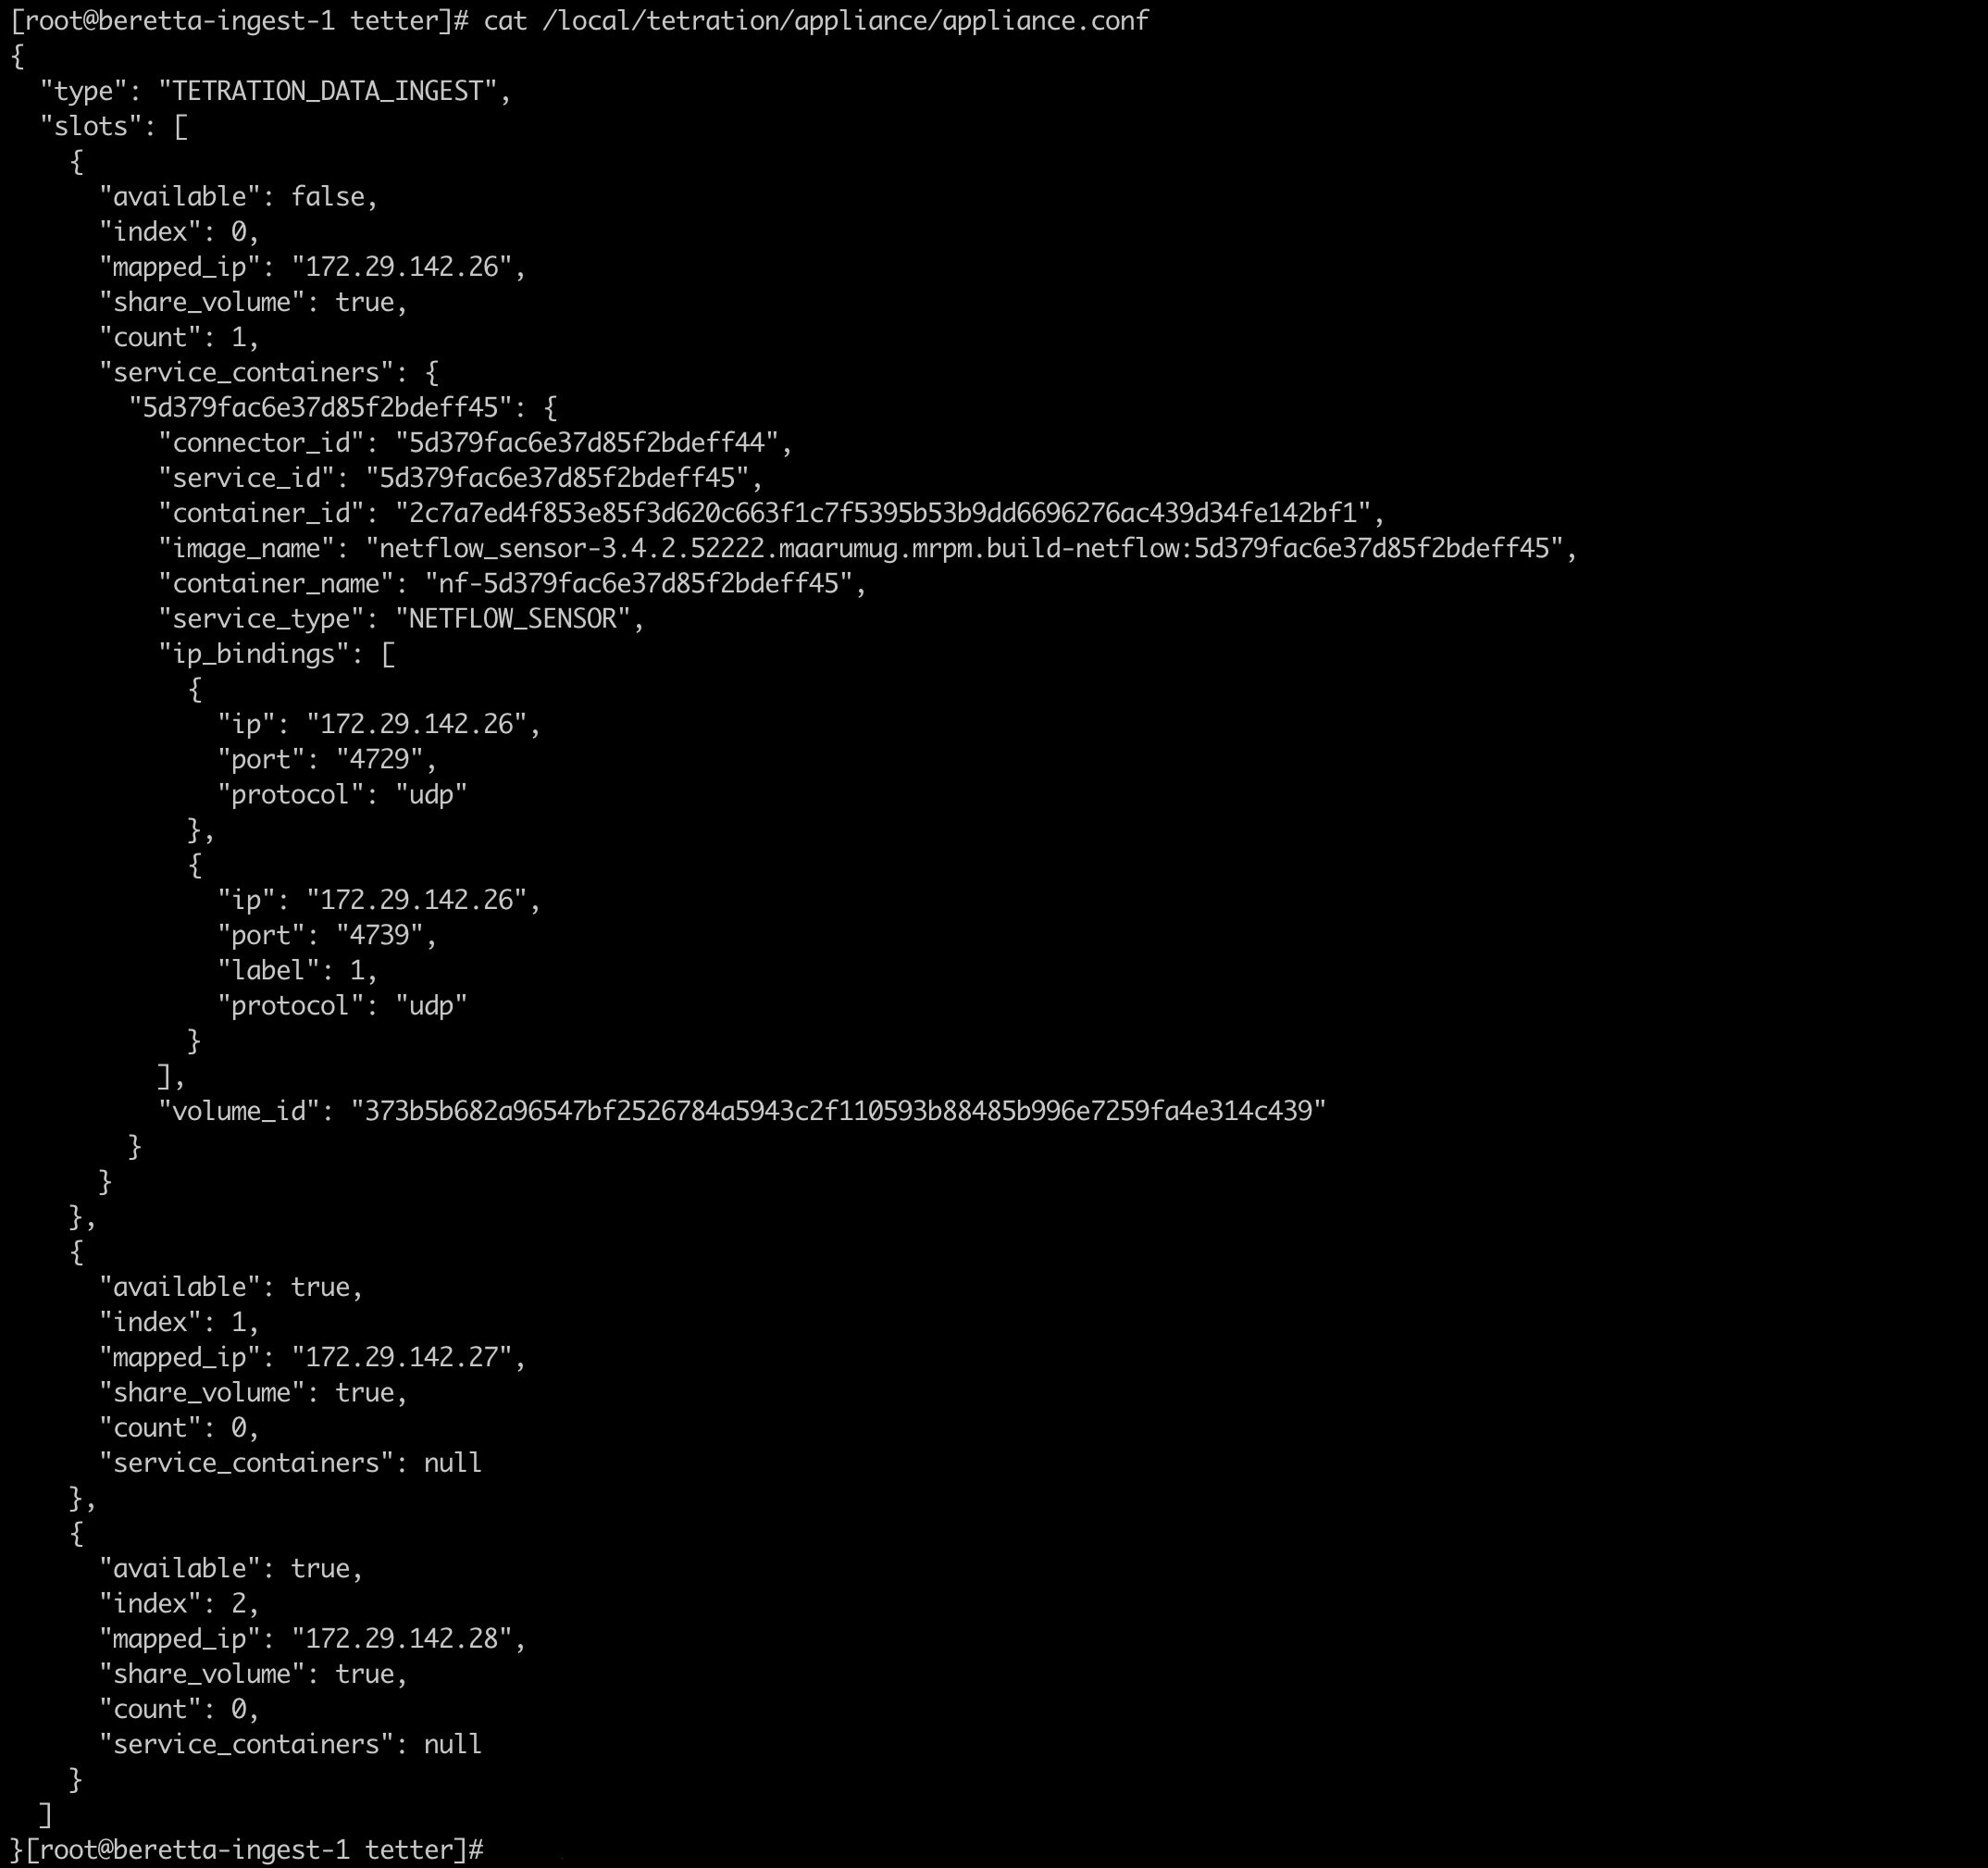 Slot used by the Docker container and list of exposed ports